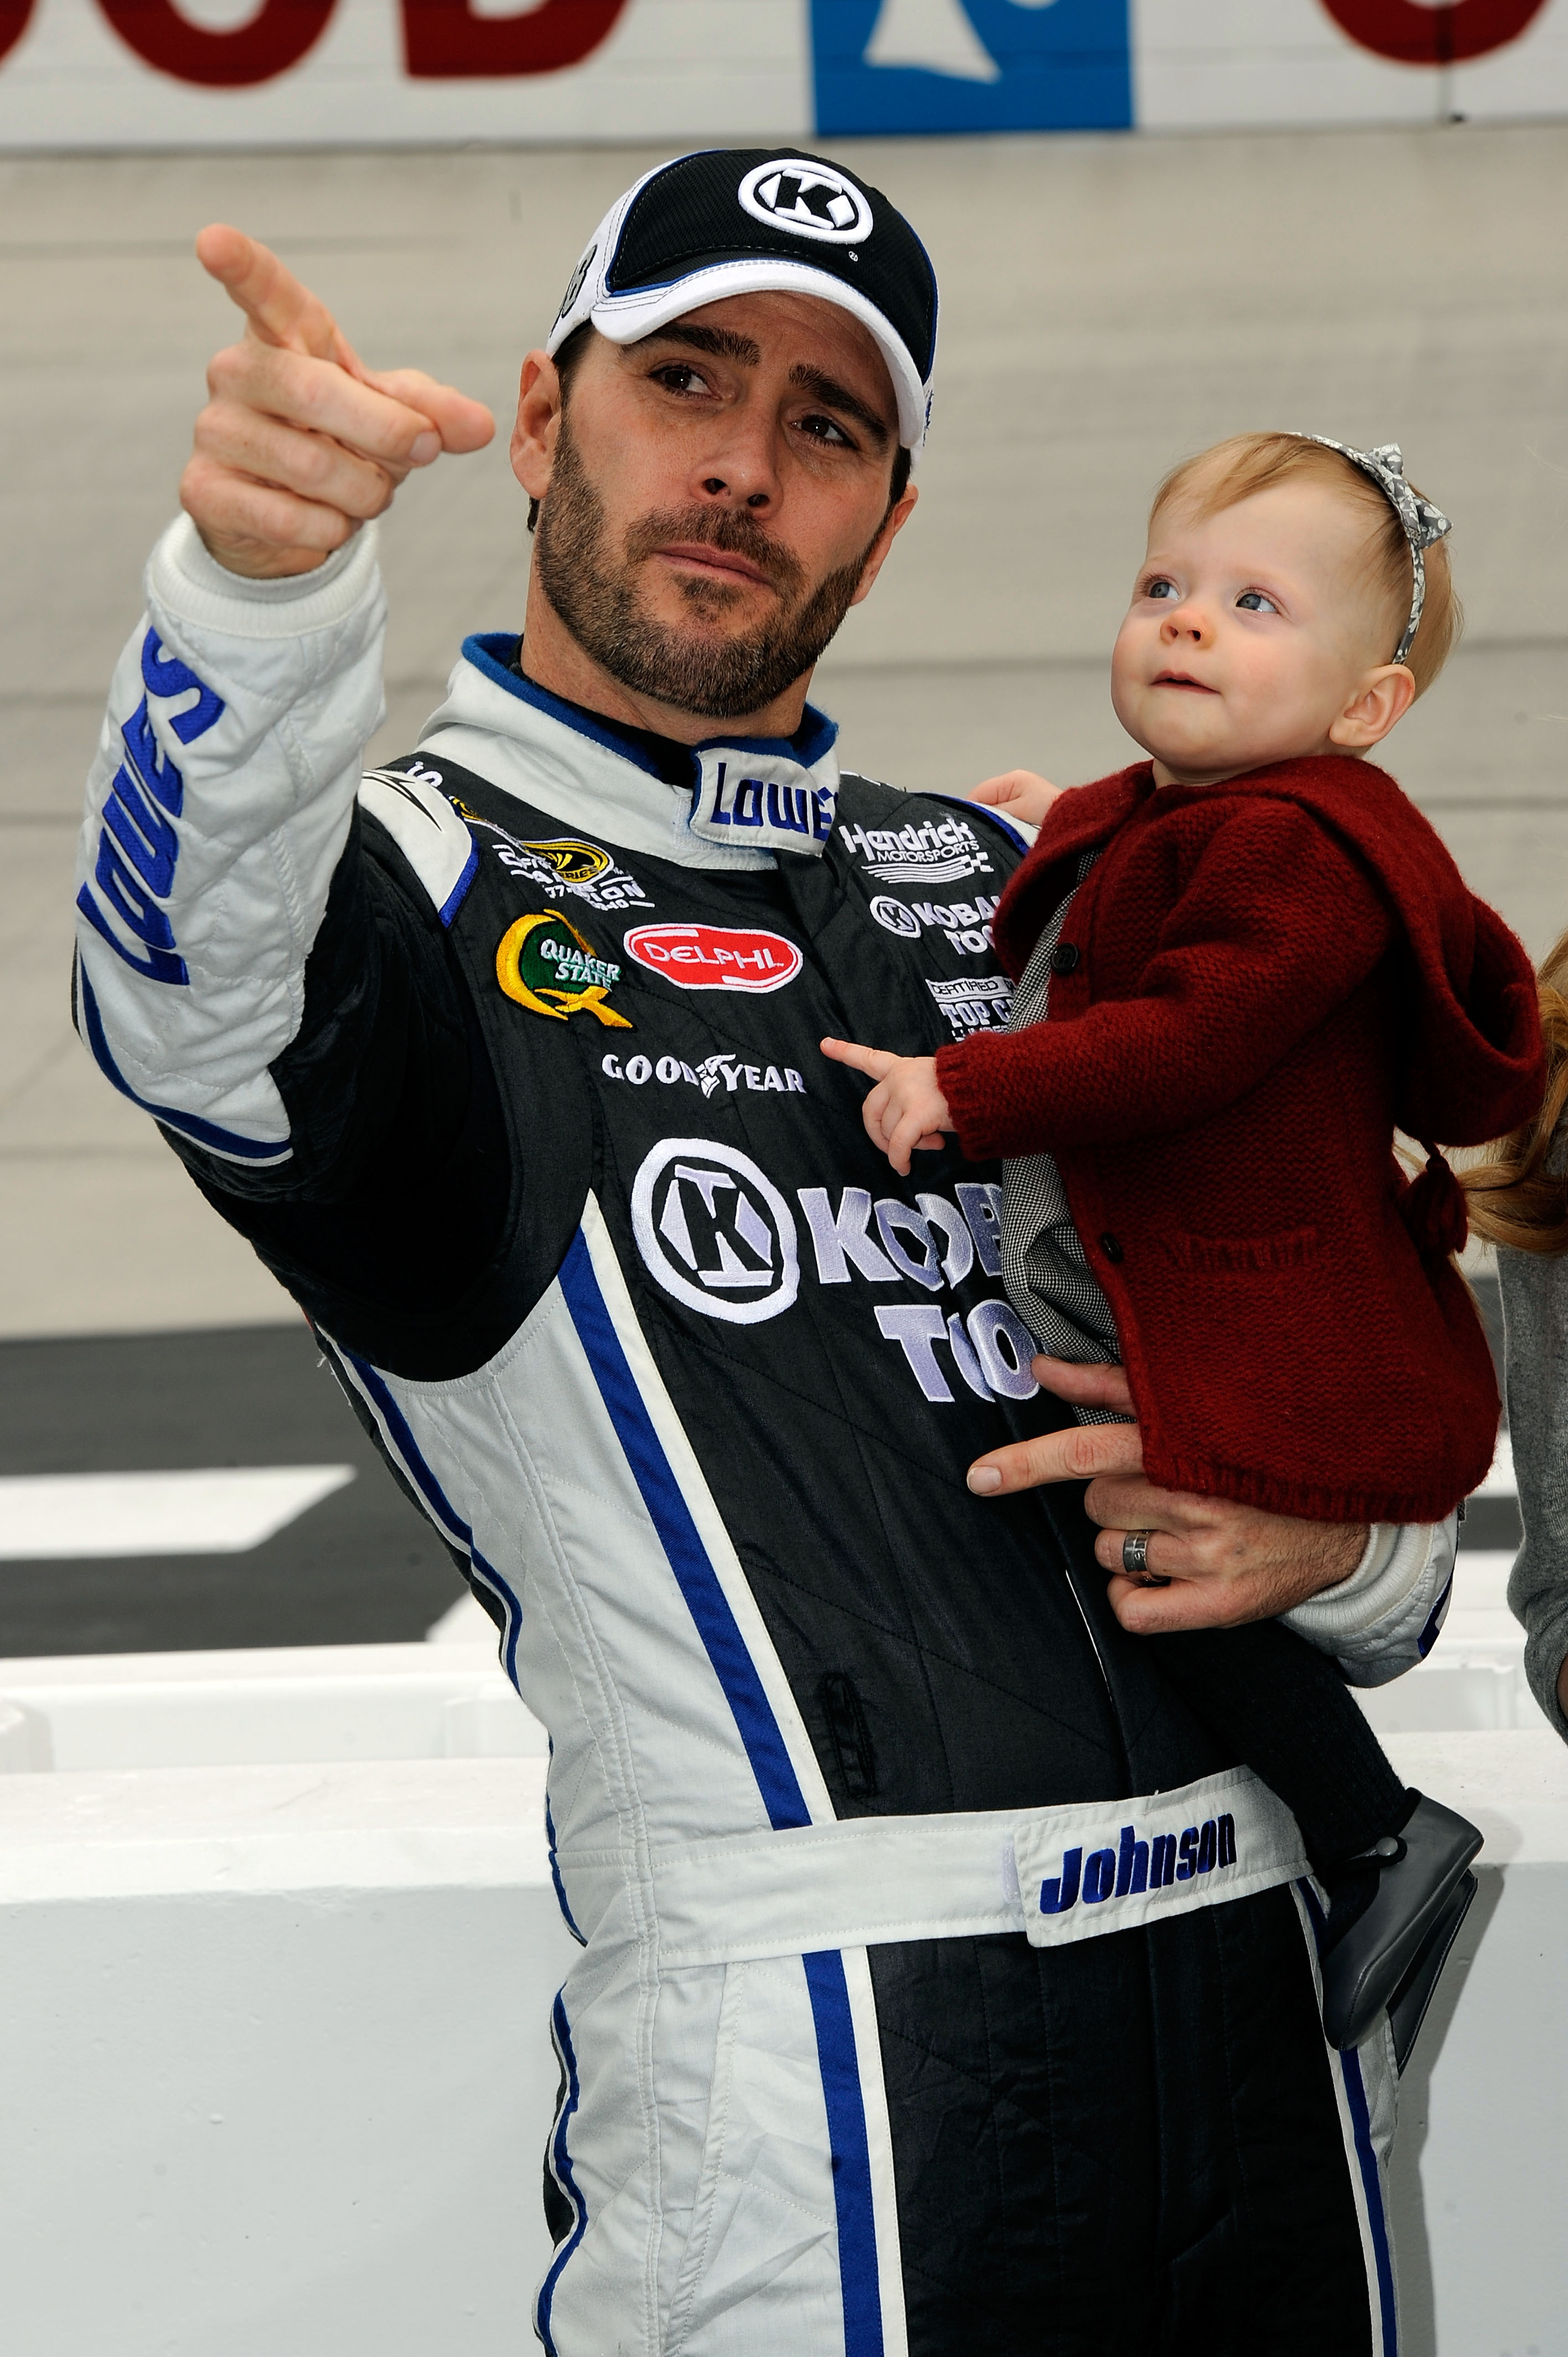 BRISTOL, TN - MARCH 20:  Jimmie Johnson (L), driver of the #48 Lowe's/Kobalt Tools Chevrolet, holds his daughter Genevieve Marie (C) on the grid prior to the start ofduring the NASCAR Sprint Cup Series Jeff Byrd 500 Presented By Food City at Bristol Motor